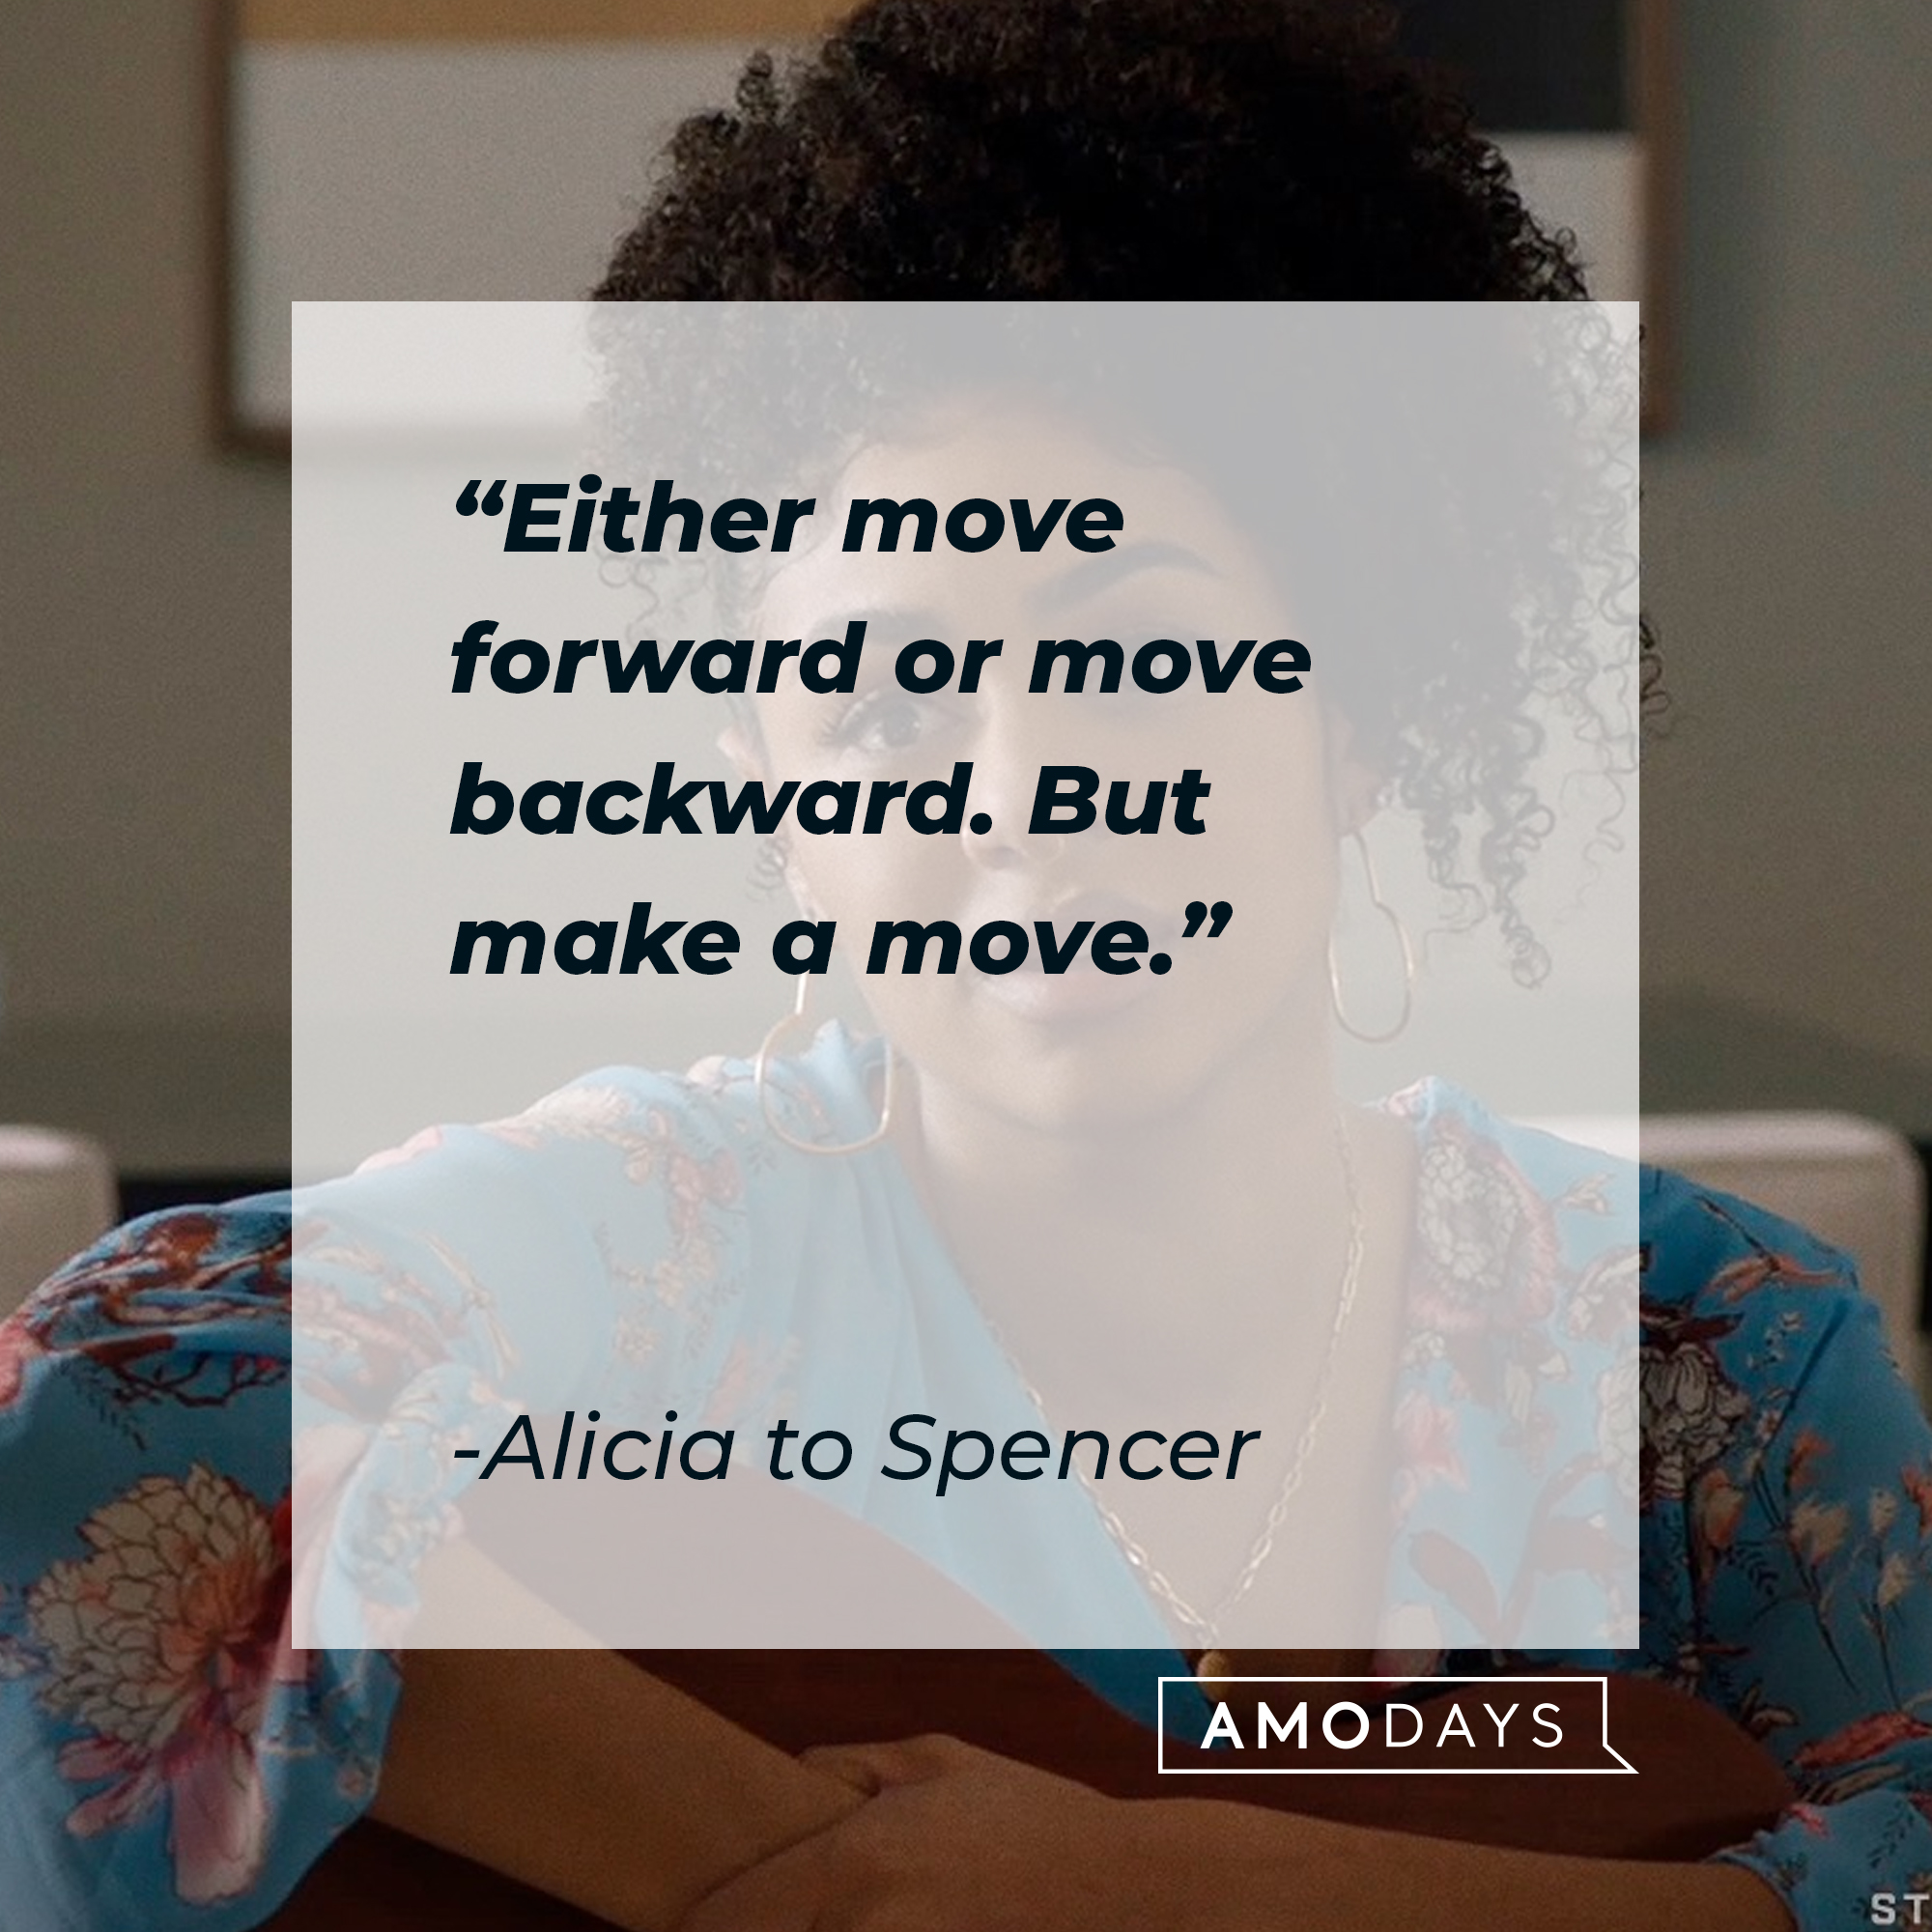 A quote from Alicia to Spencer: "Either move forward or move backward. But make a move." | Source: facebook.com/CWAllAmerican